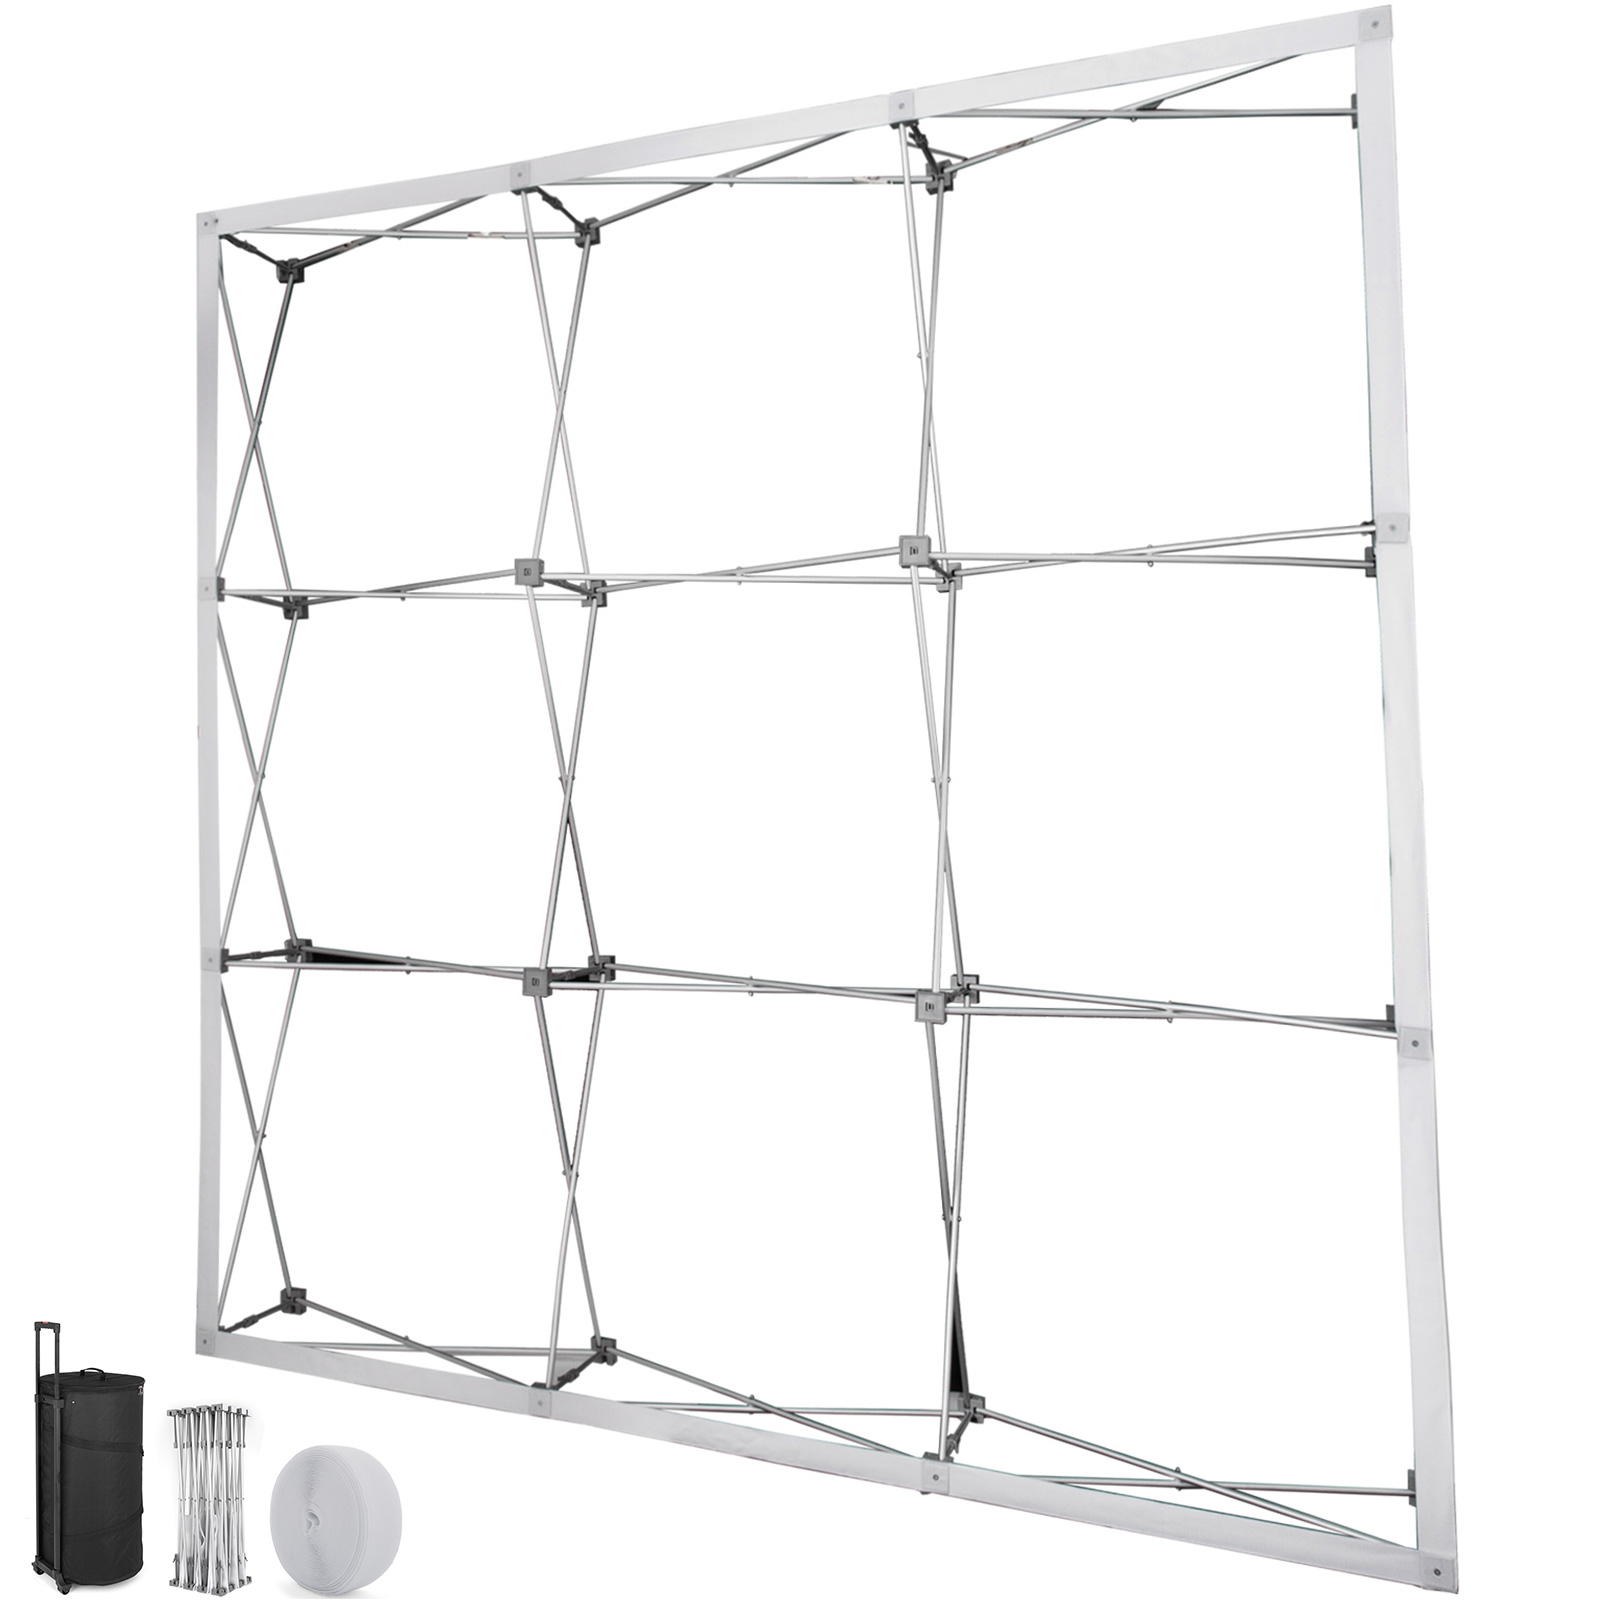 8*8FT Trade Show Display Booth Frame Stand Backdrop Booth Frame USA STOCK 